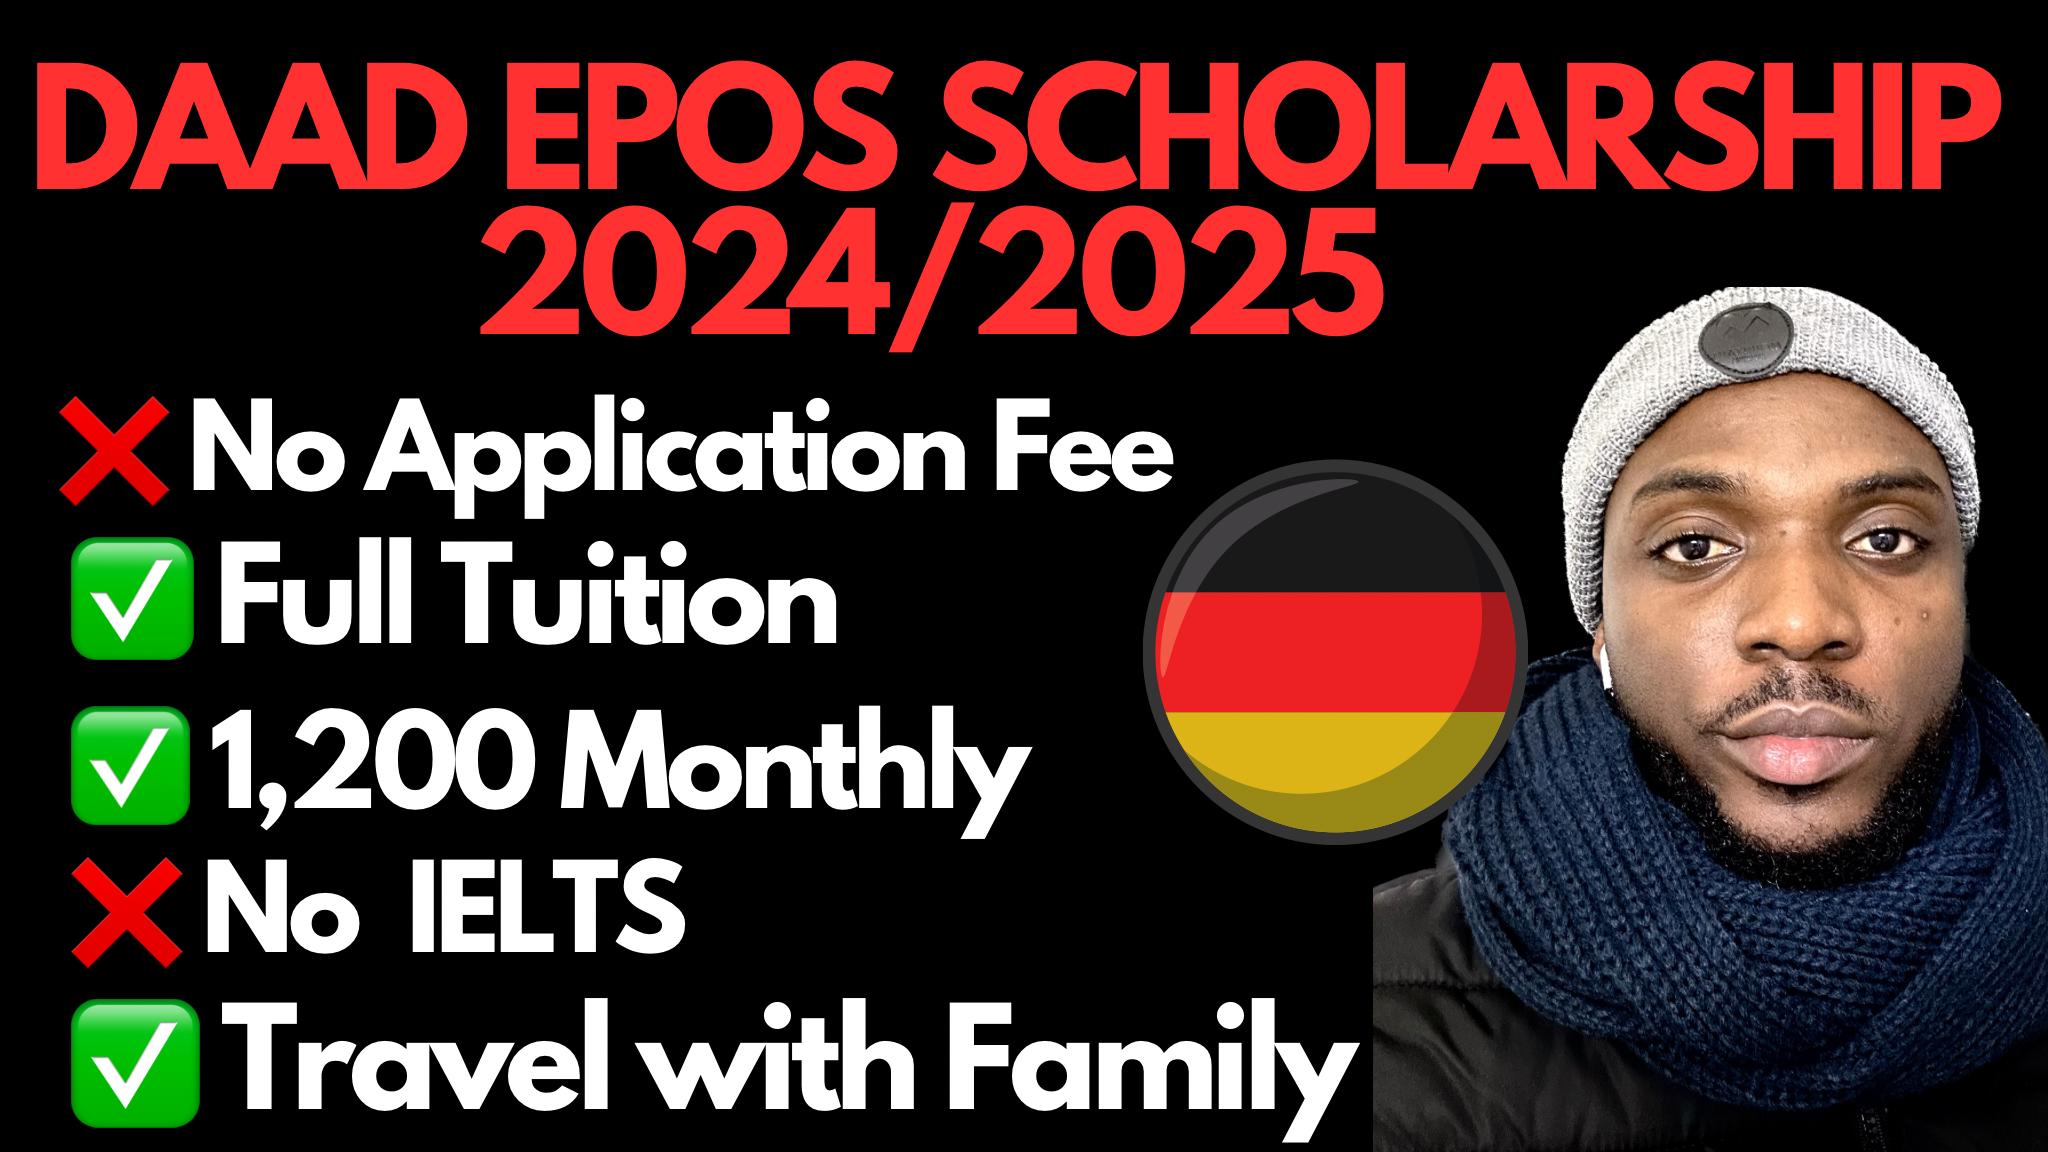 Fully Funded DAAD EPOS Scholarship in Germany 202425 Scholarships abroad